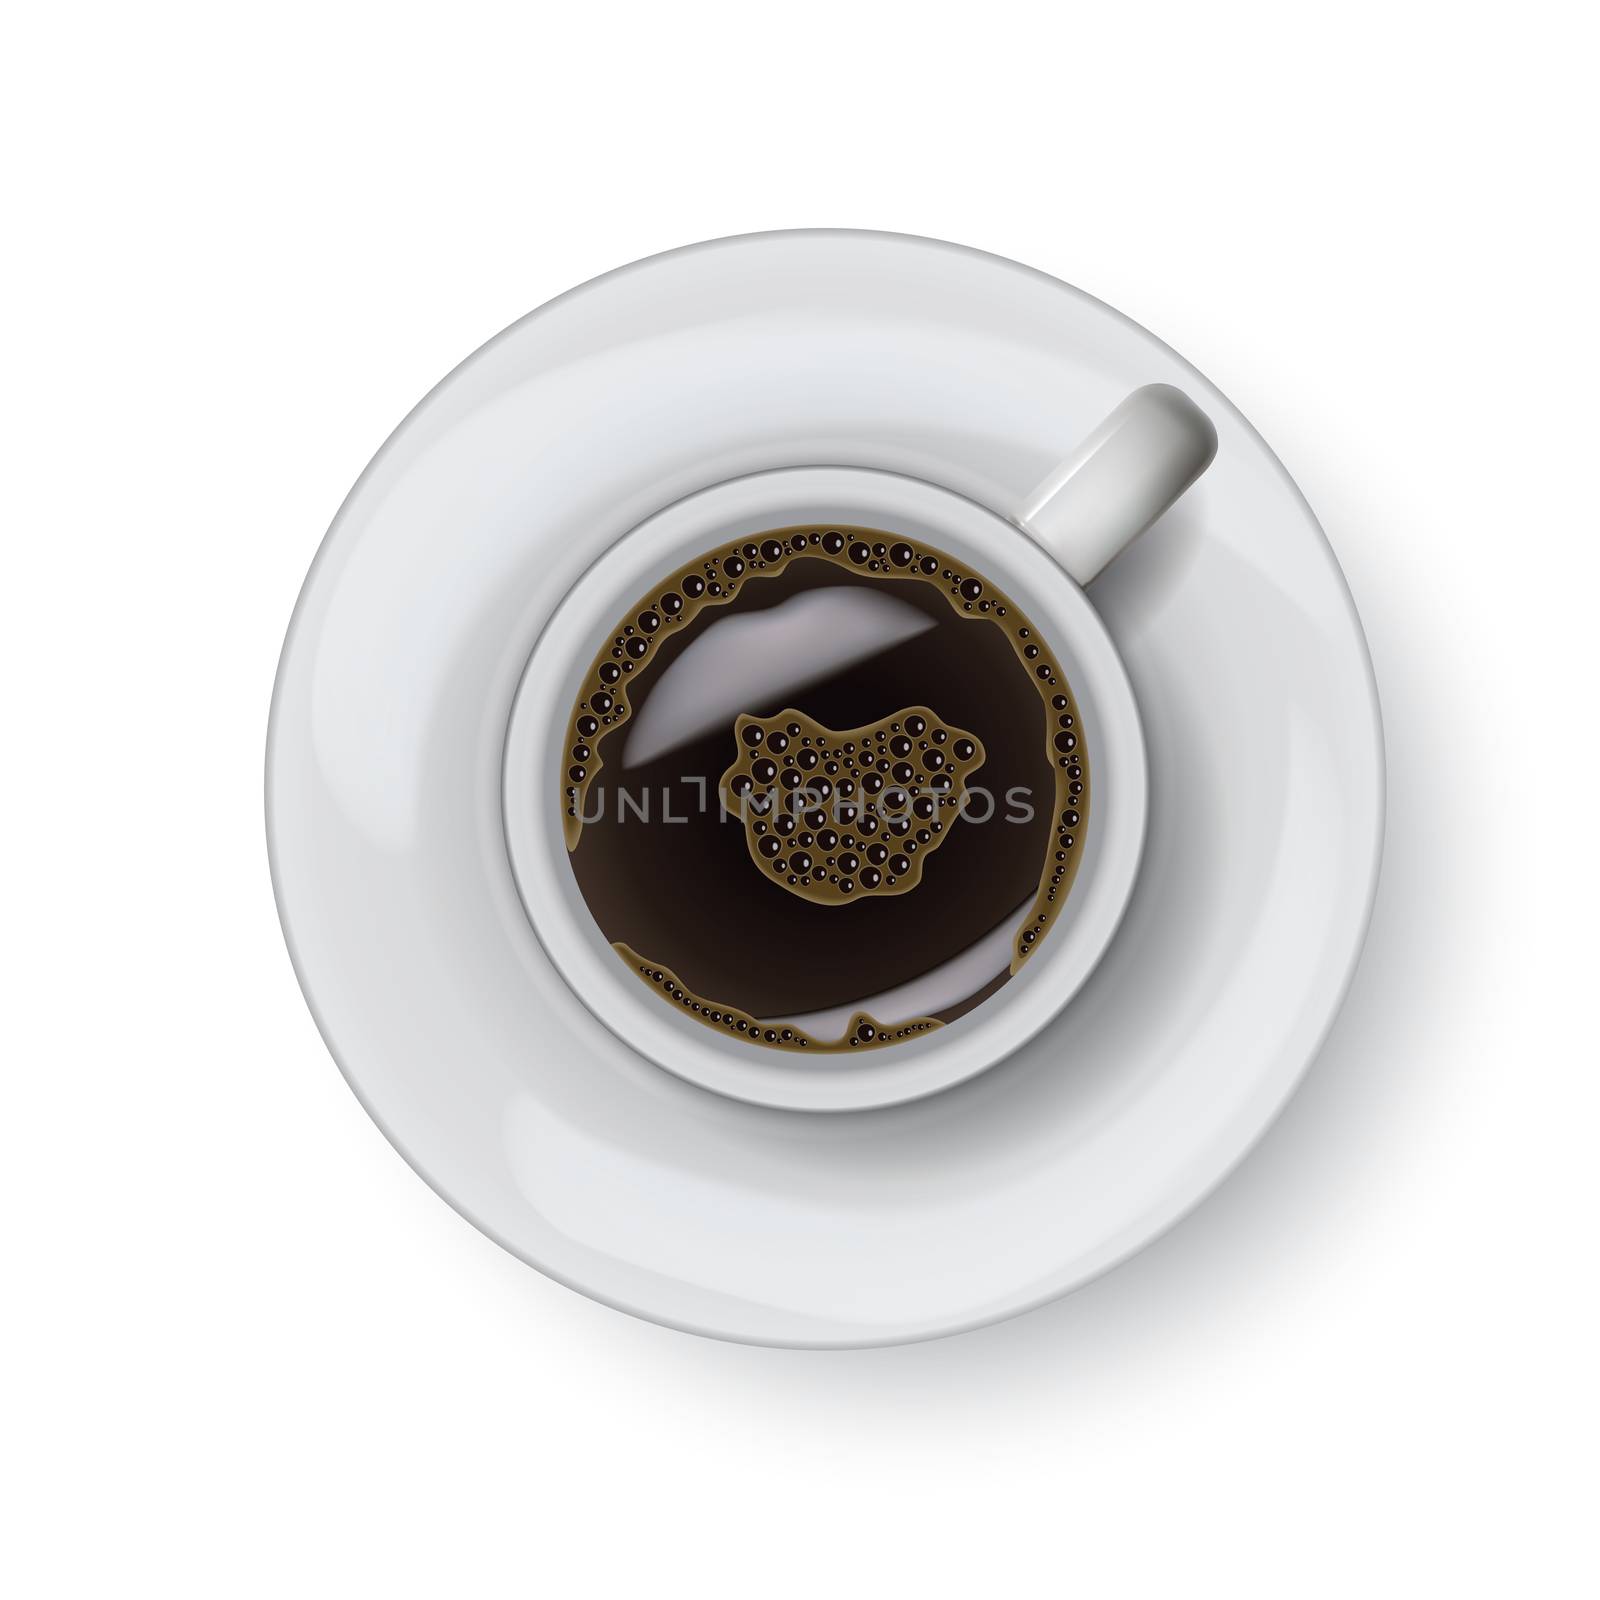 Coffee cup on plate realistic isolsted on white background.